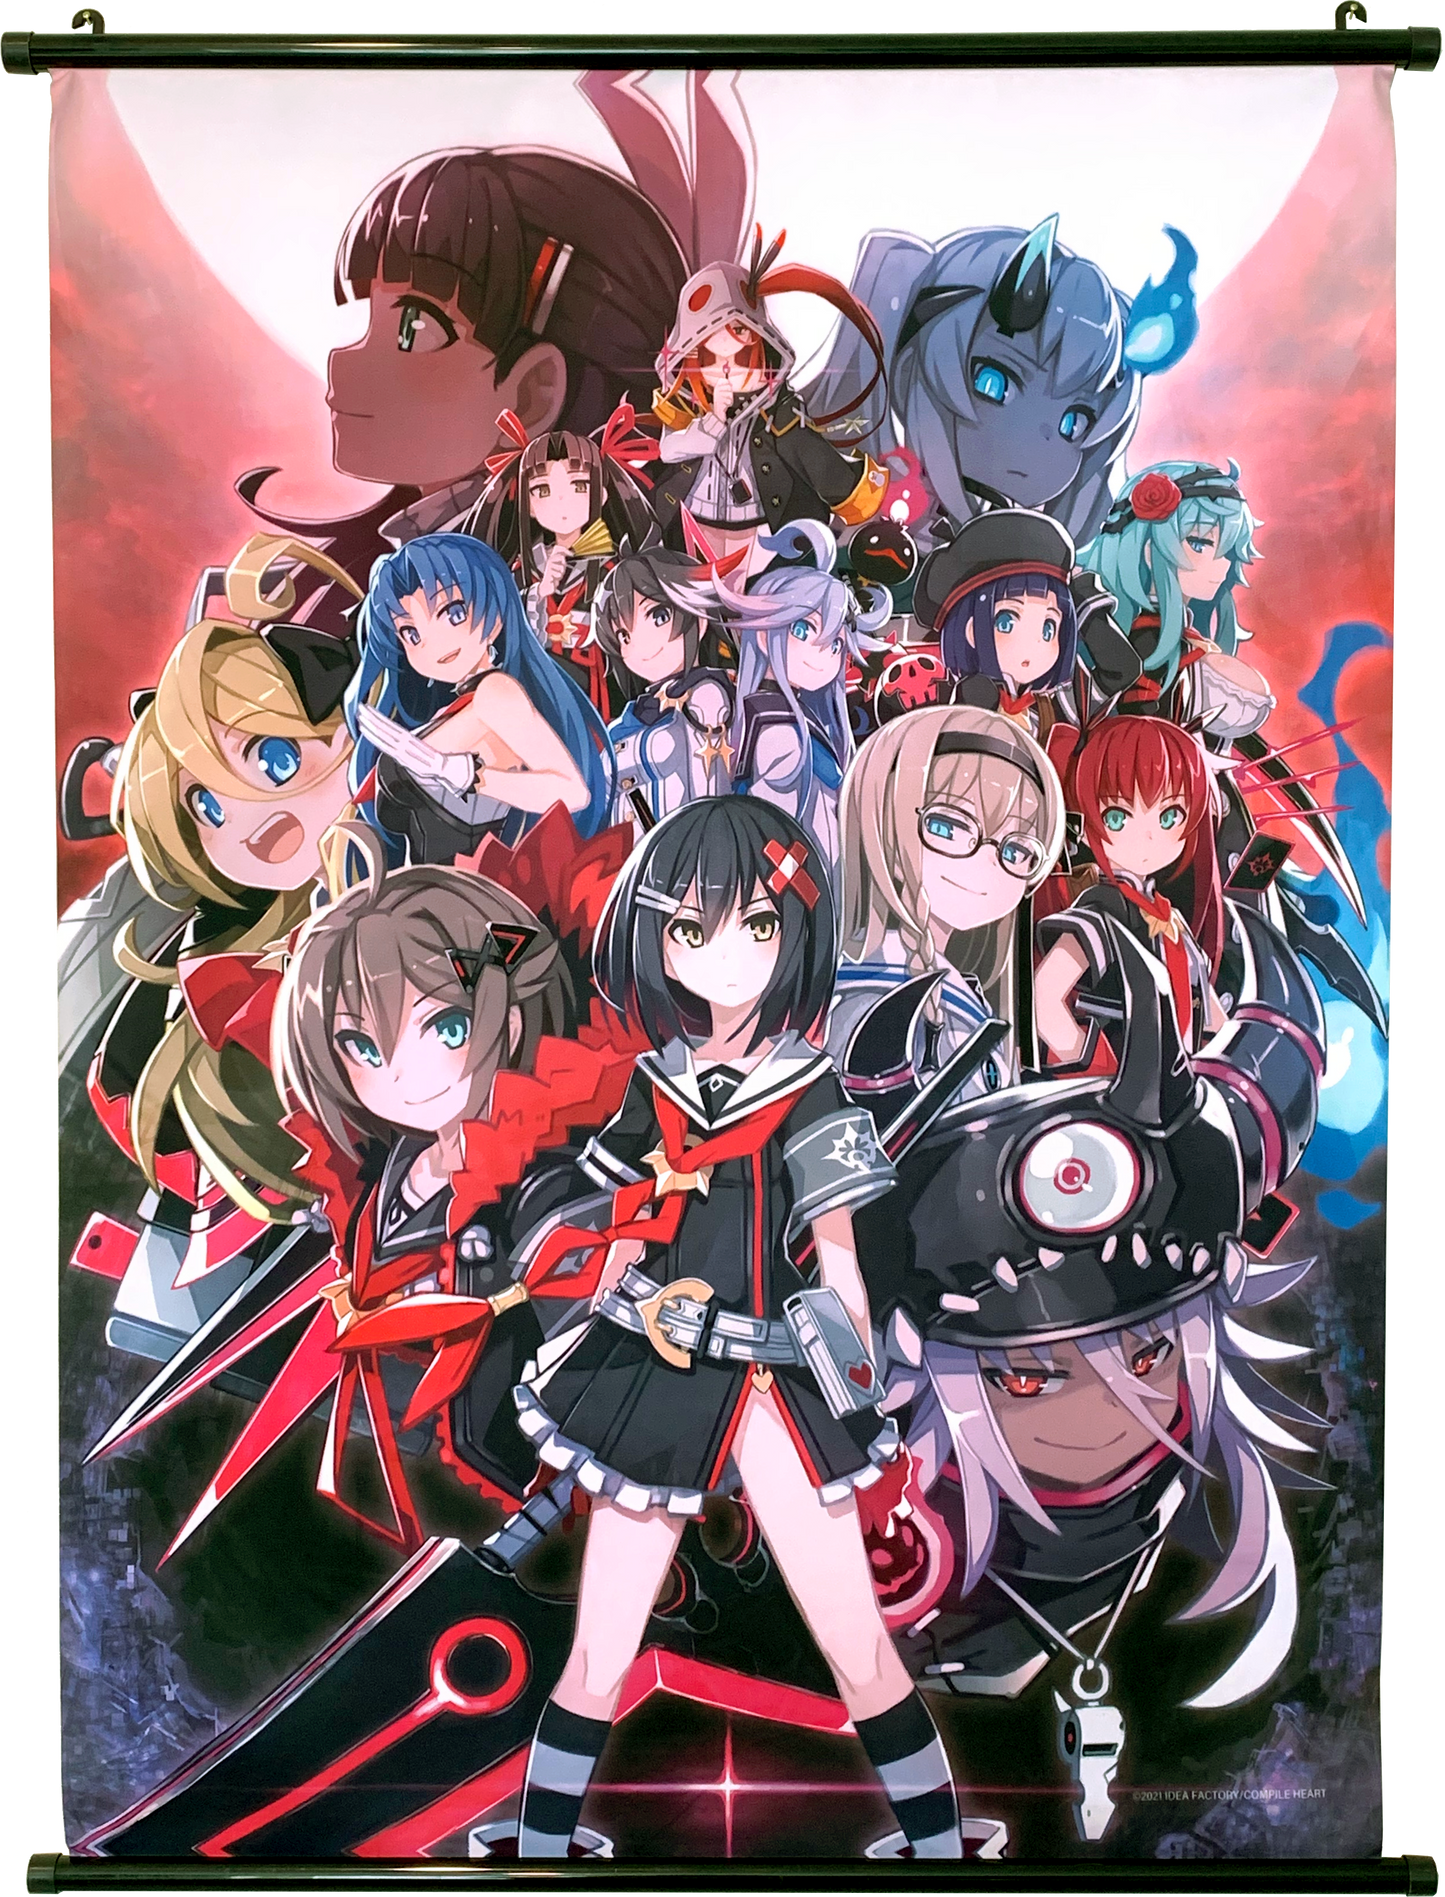 Mary Skelter Wall Scroll - 24" x 32"